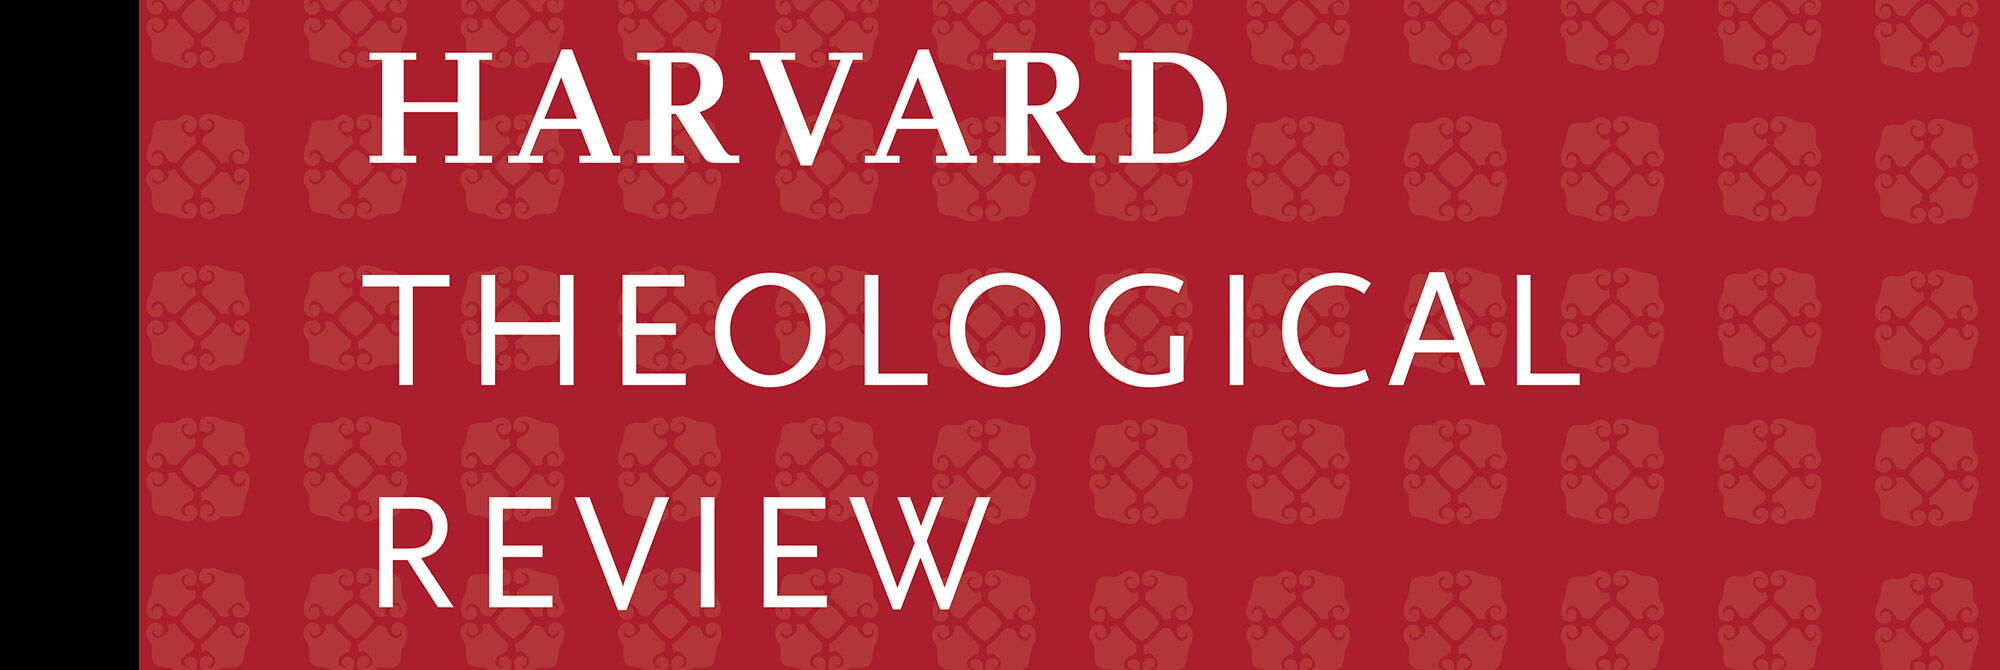 Harvard Theological Review logo one a red patterned background